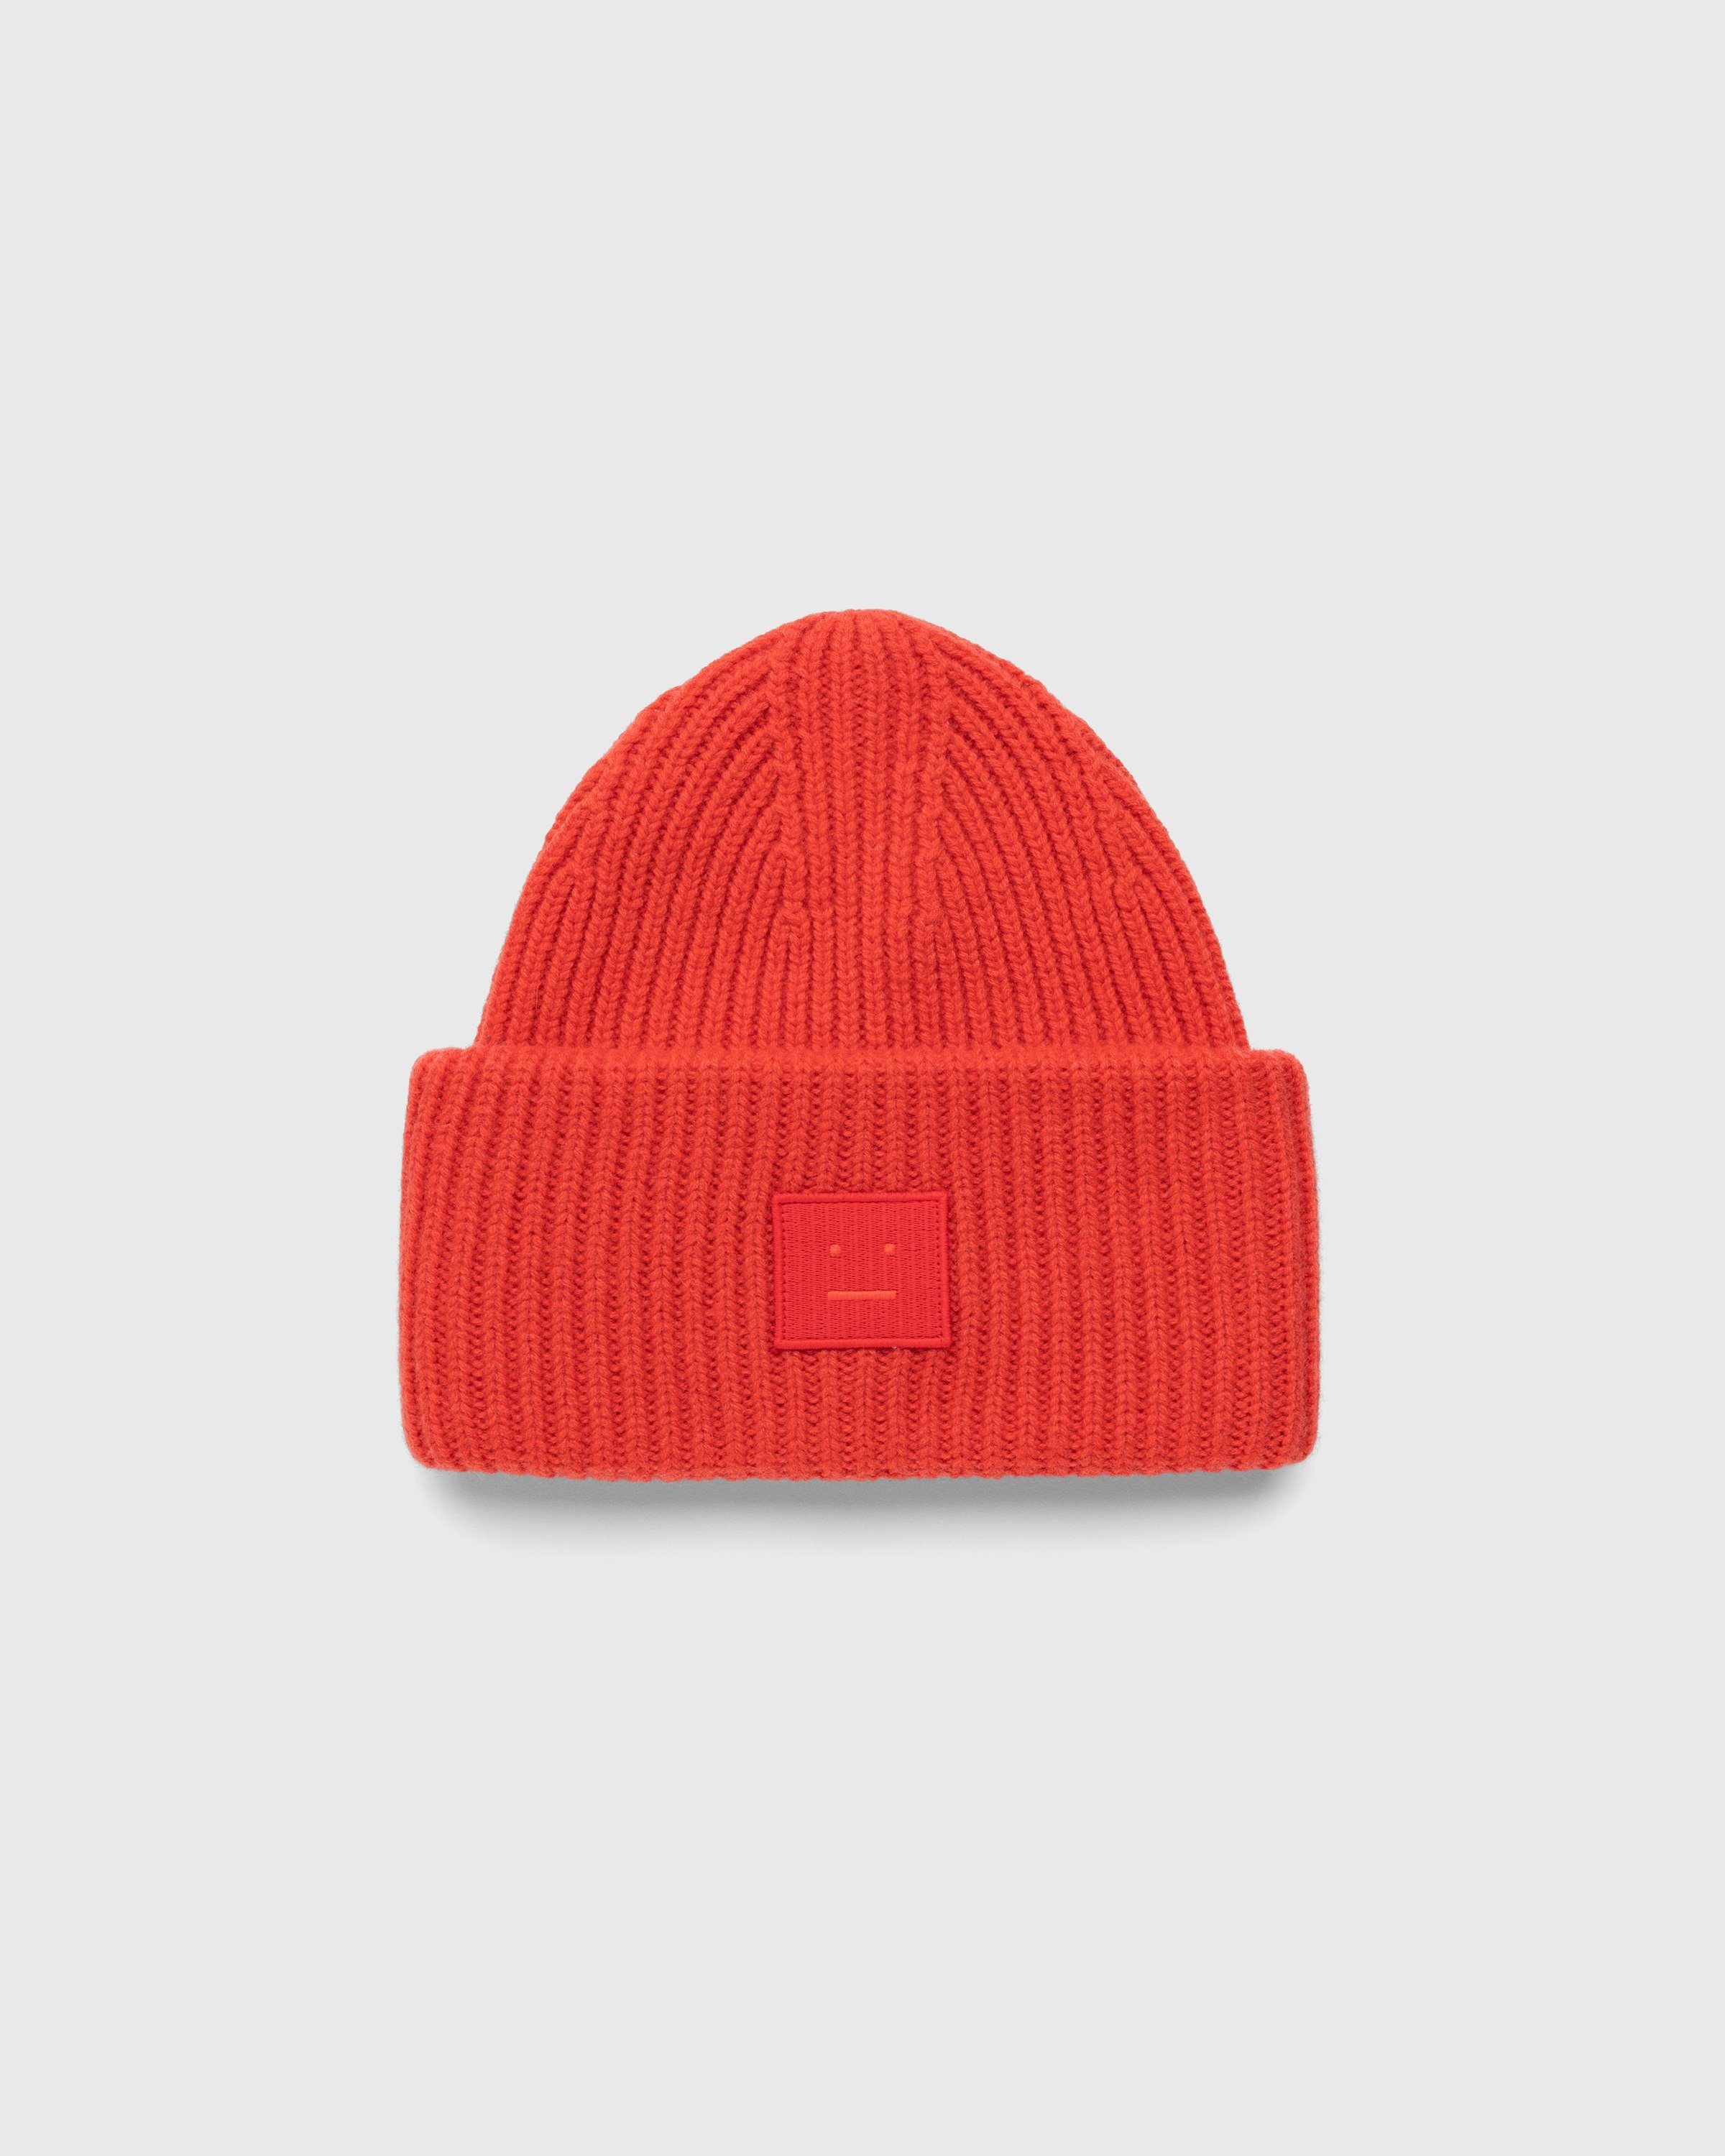 Acne Studios – Large Face Logo Beanie Red - Beanies - Red - Image 1